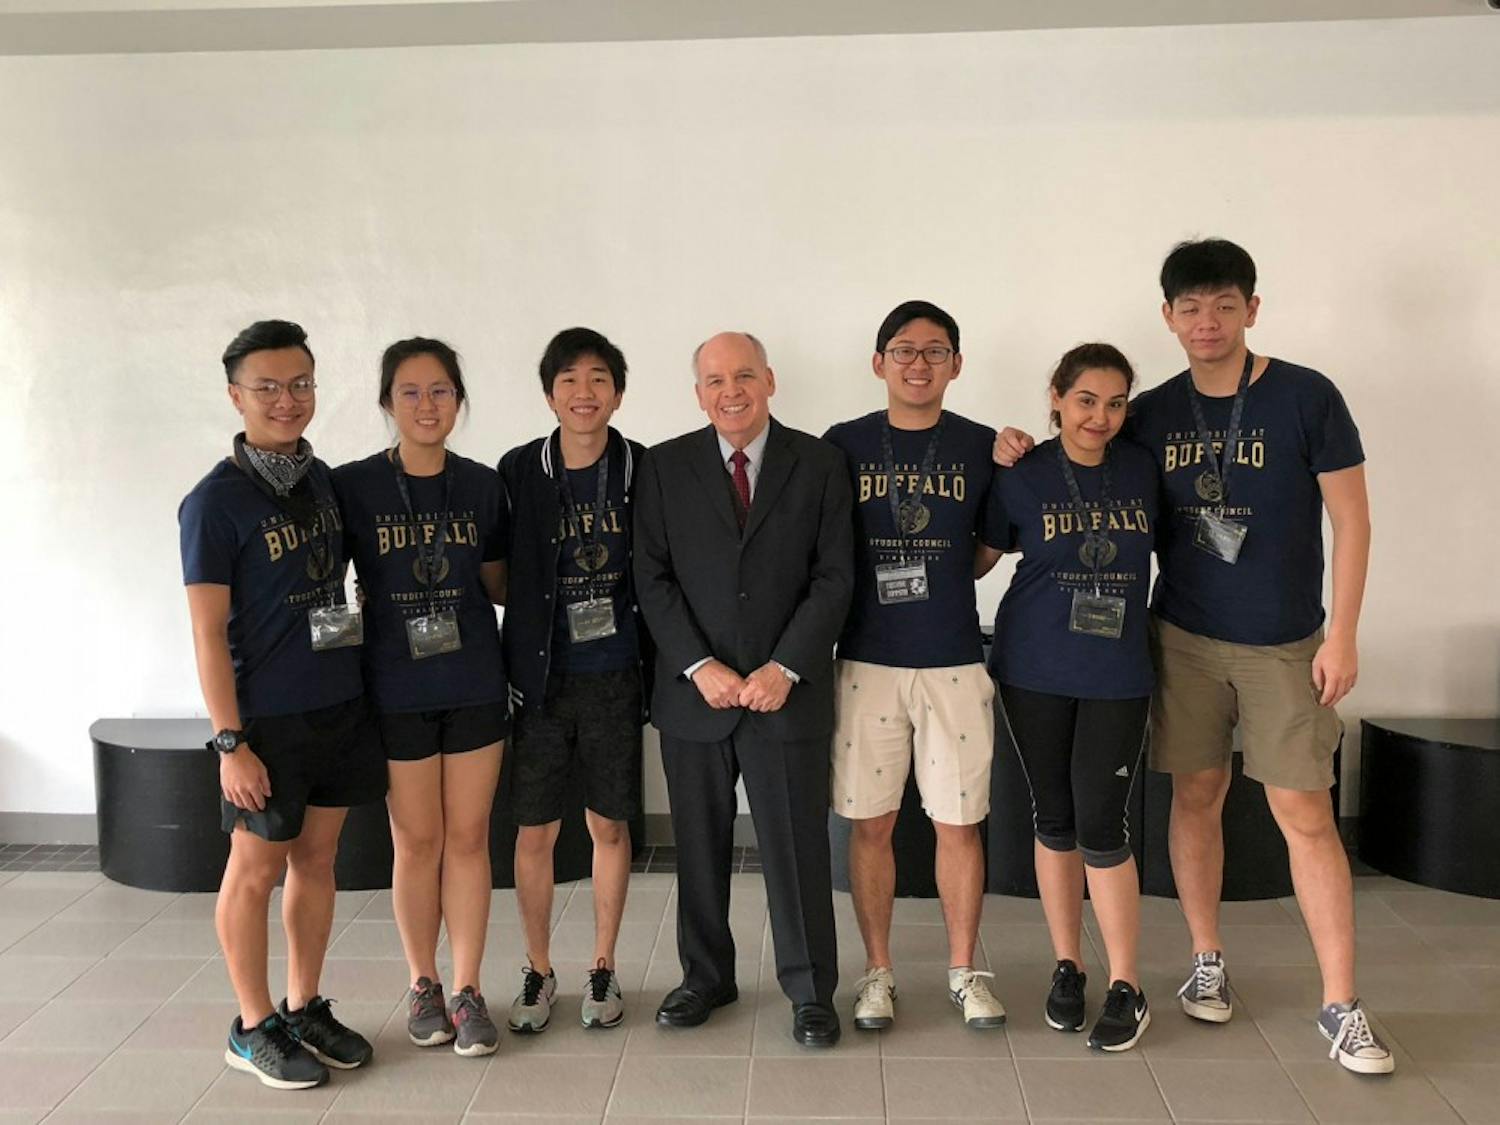 Vice Provost for International Education Stephen Dunnett stands with students in the international program in Singapore in January 2018. On Sept 1. of this year, Dunnett will step down from his position and help the university transition the program before he fully retires on Sept. 1, 2019.